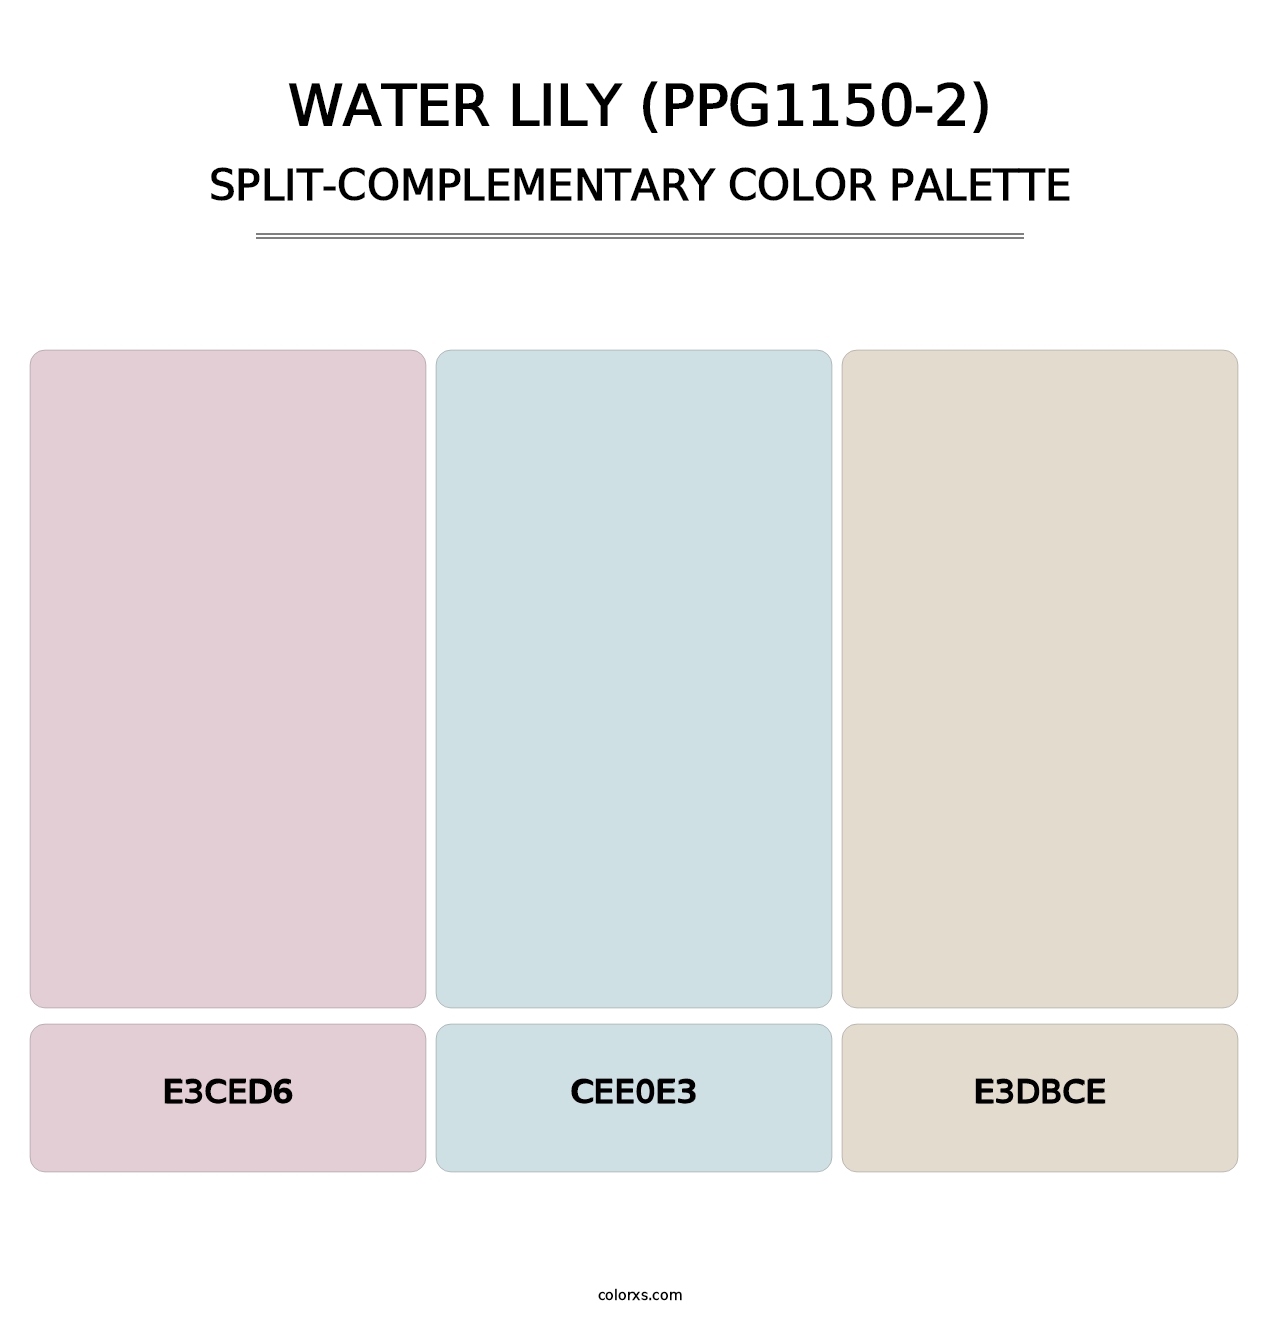 Water Lily (PPG1150-2) - Split-Complementary Color Palette